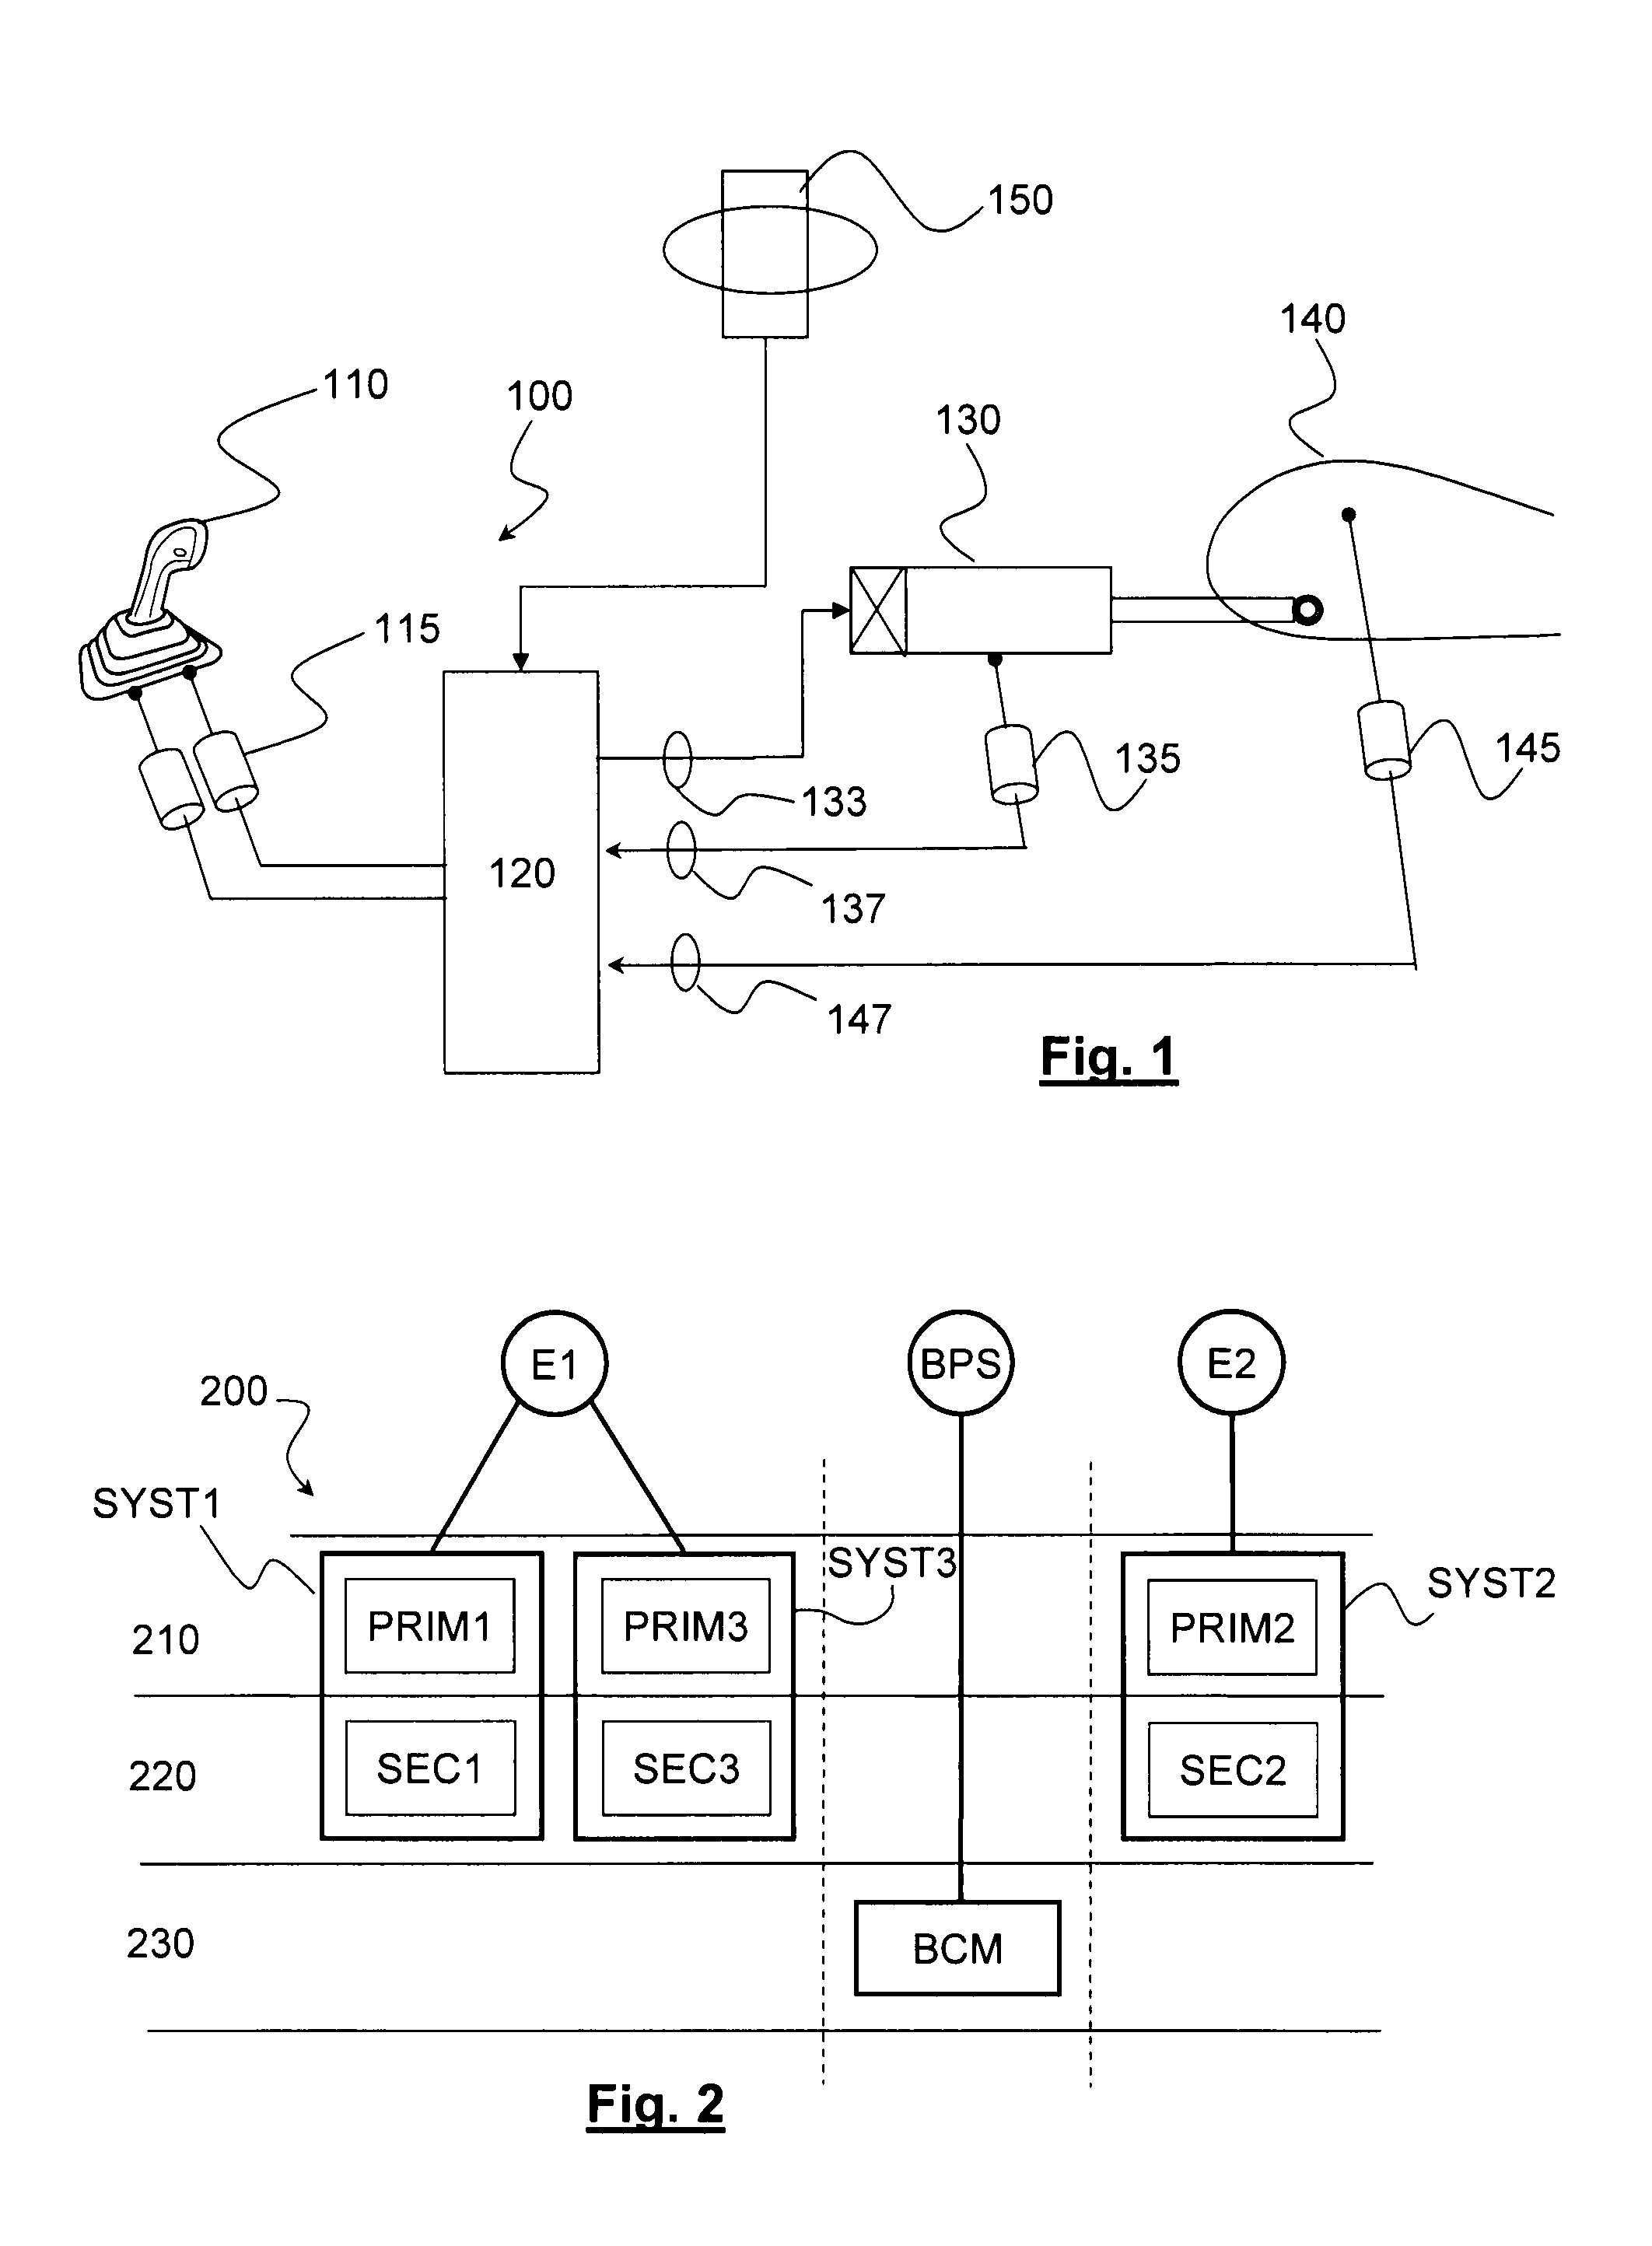 Distributed flight control system implemented according to an integrated modular avionics architecture